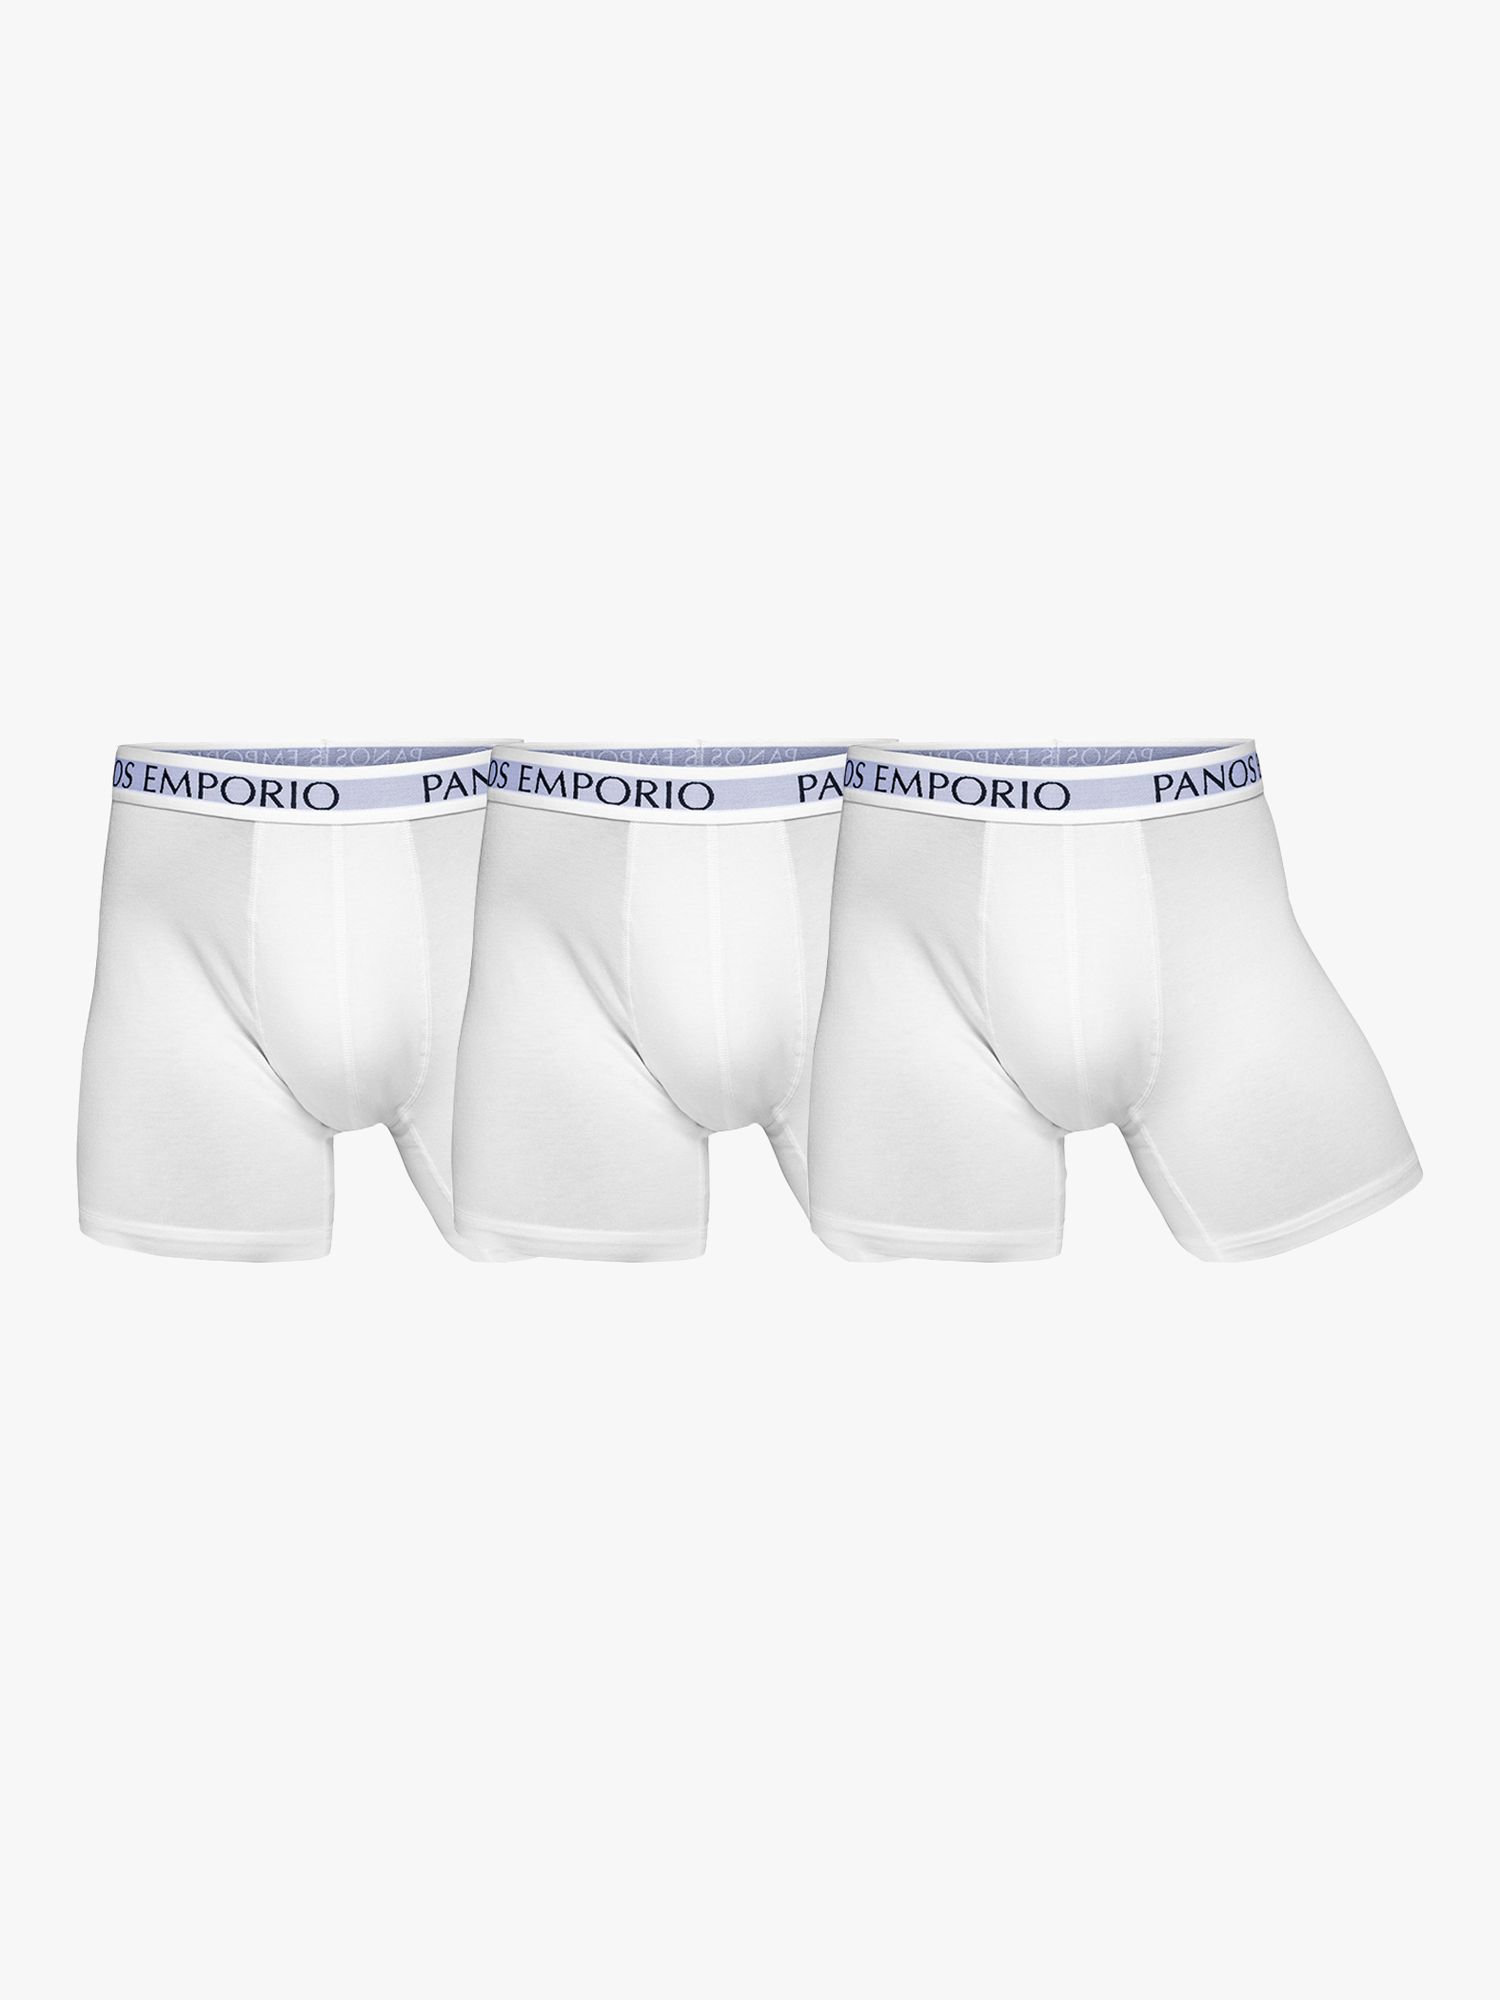 Panos Emporio Eco Bamboo and Organic Cotton Blend Trunks, Pack of 3, White, S